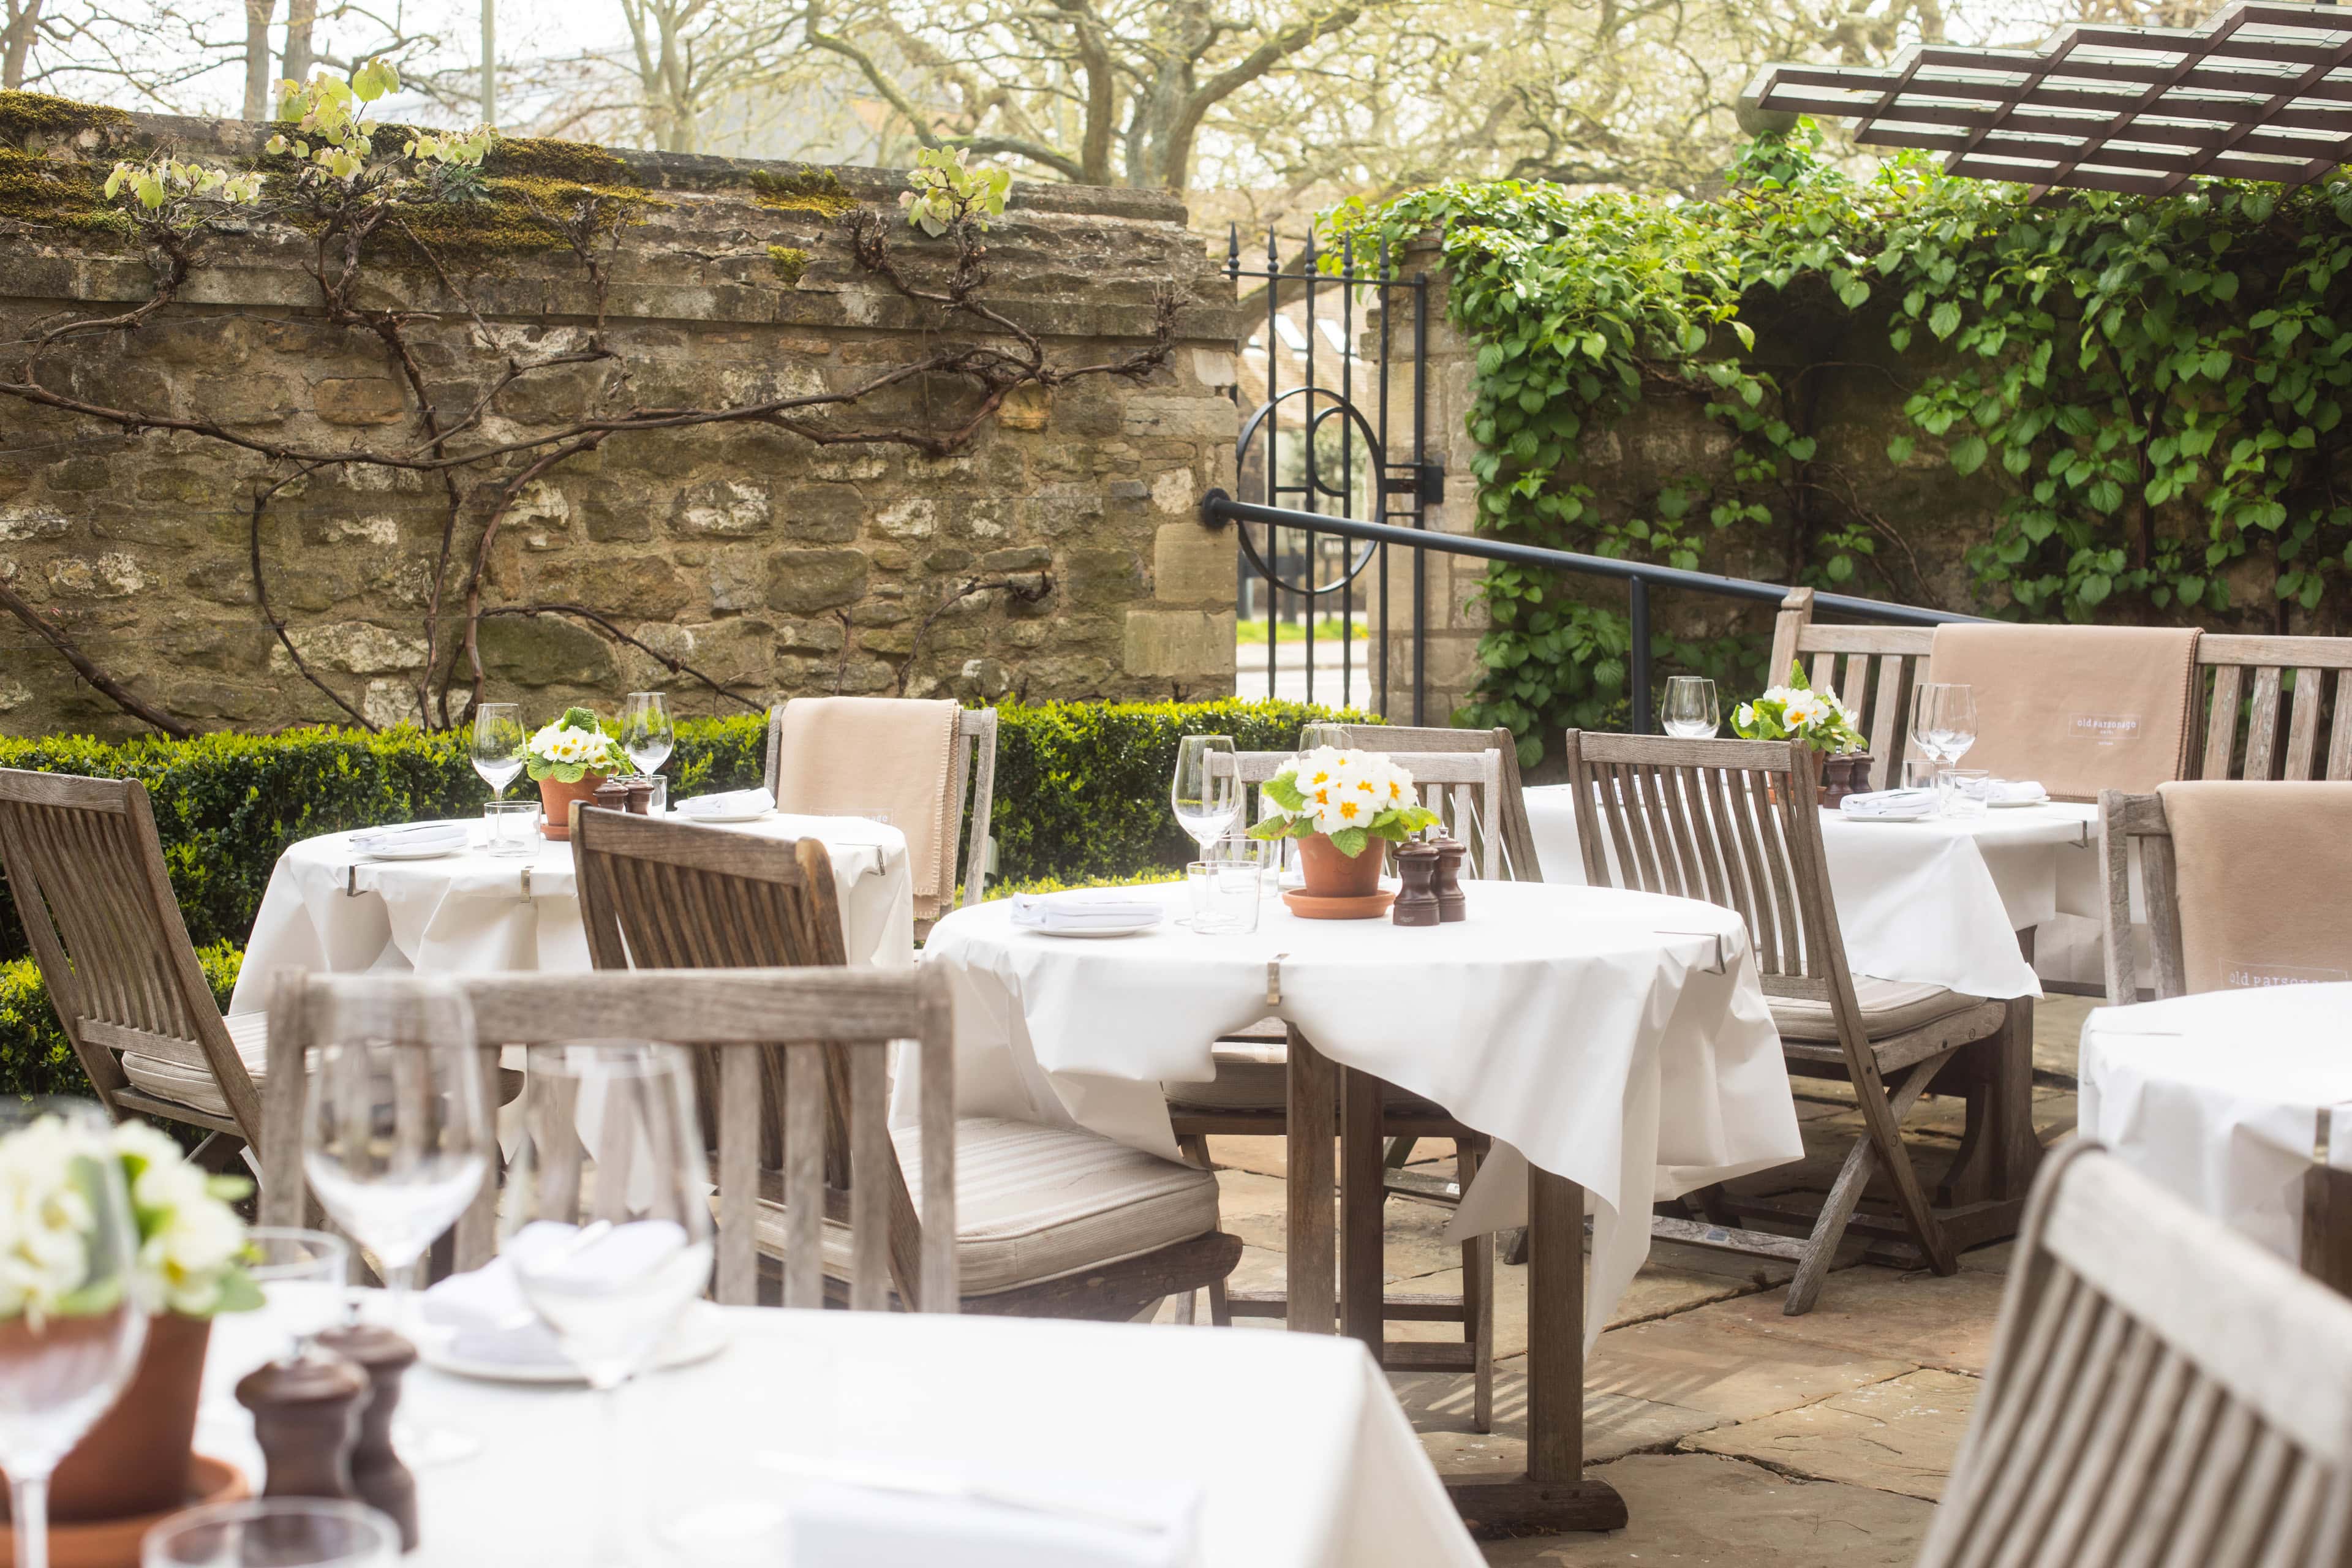 0004 - 2019 - Parsonage Grill - Oxford - High Res - Terrace Dining - Web Hero-Web Hero 3000kb 3840px